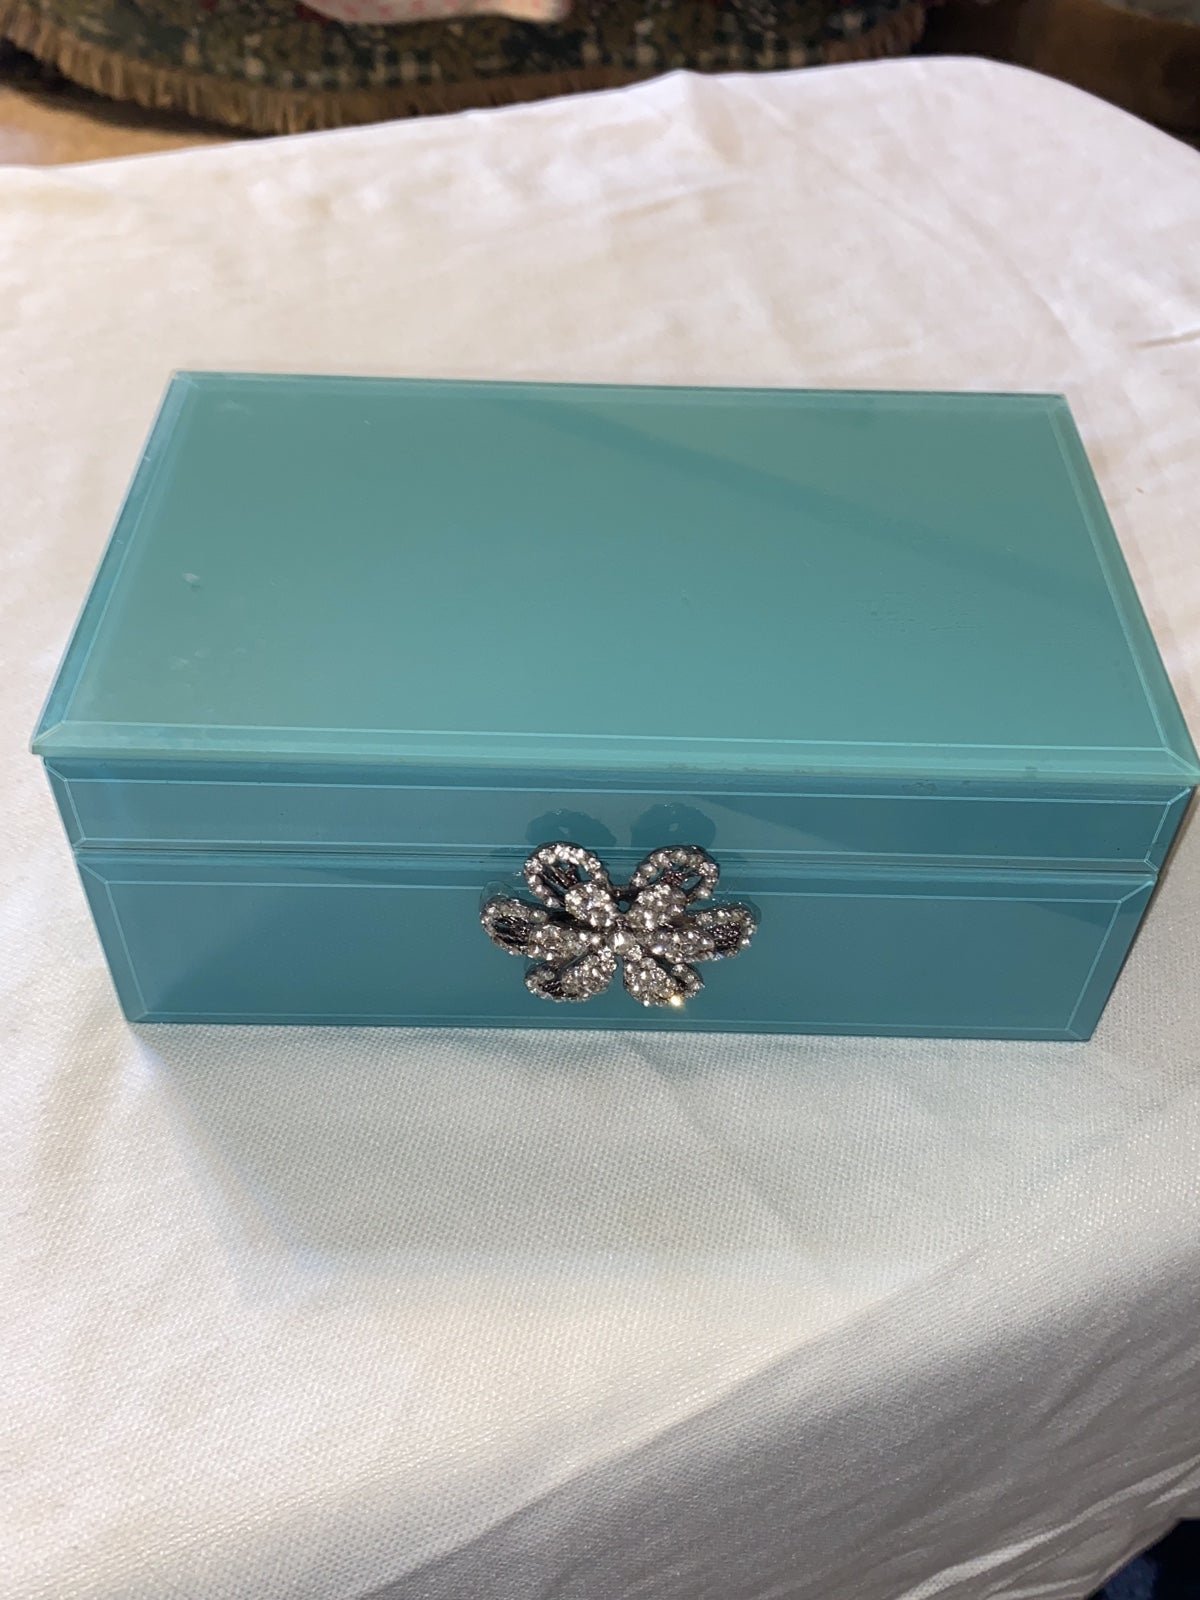 Glass Jewelry Box With Rhinestone Affixed On Front PiIOwu70y